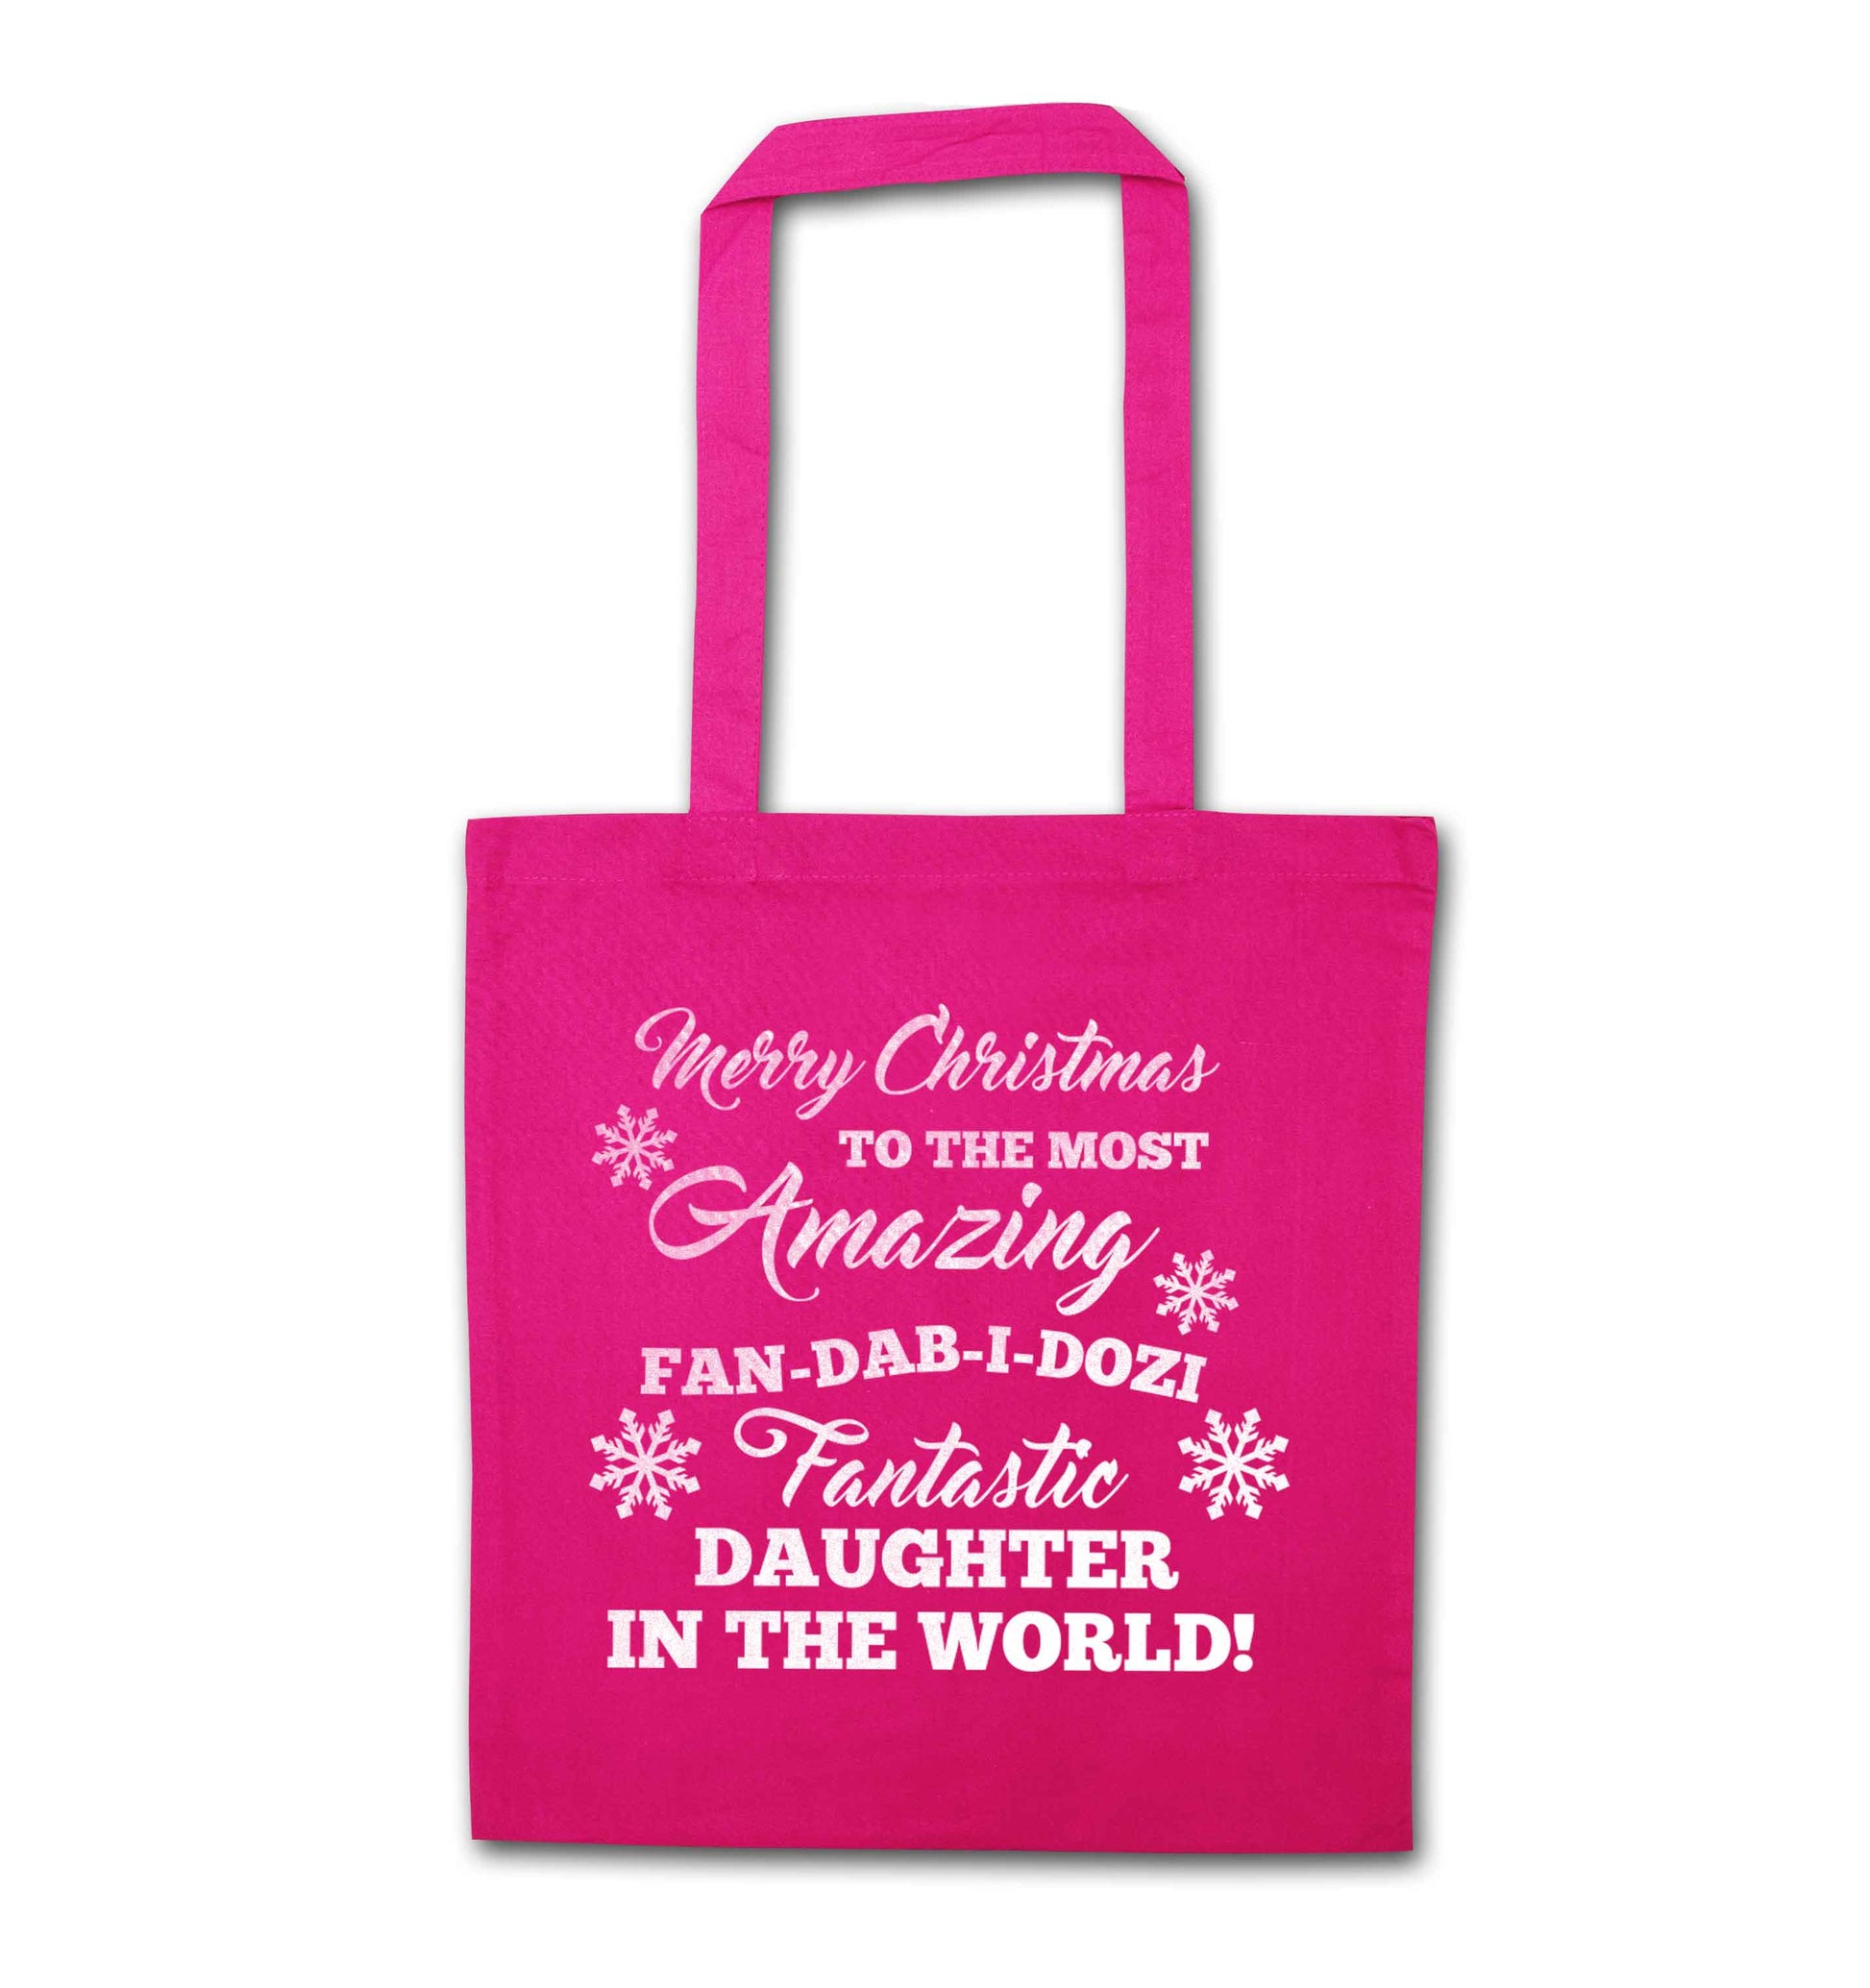 Merry Christmas to the most amazing fan-dab-i-dozi fantasic Daughter in the world pink tote bag